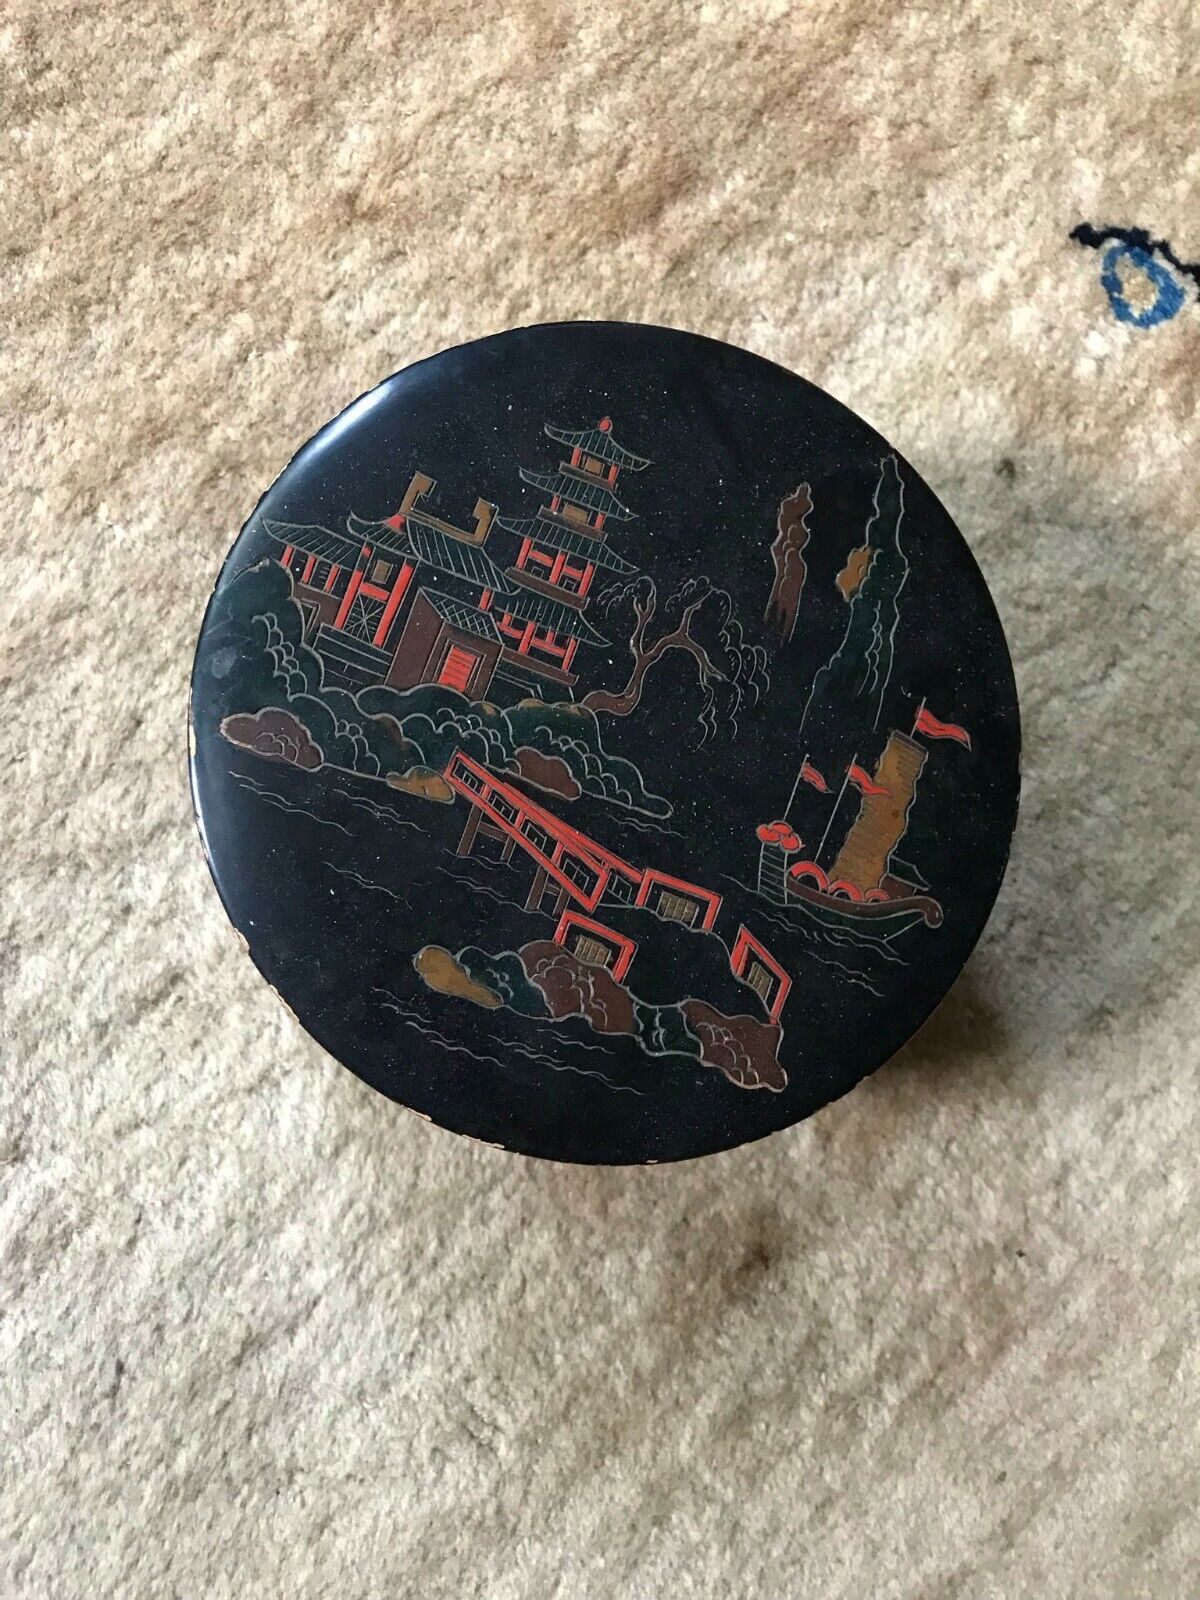 ANTIQUE Chinese / Japanese Lacquer Wooden box embossed Carved Bats fairyland